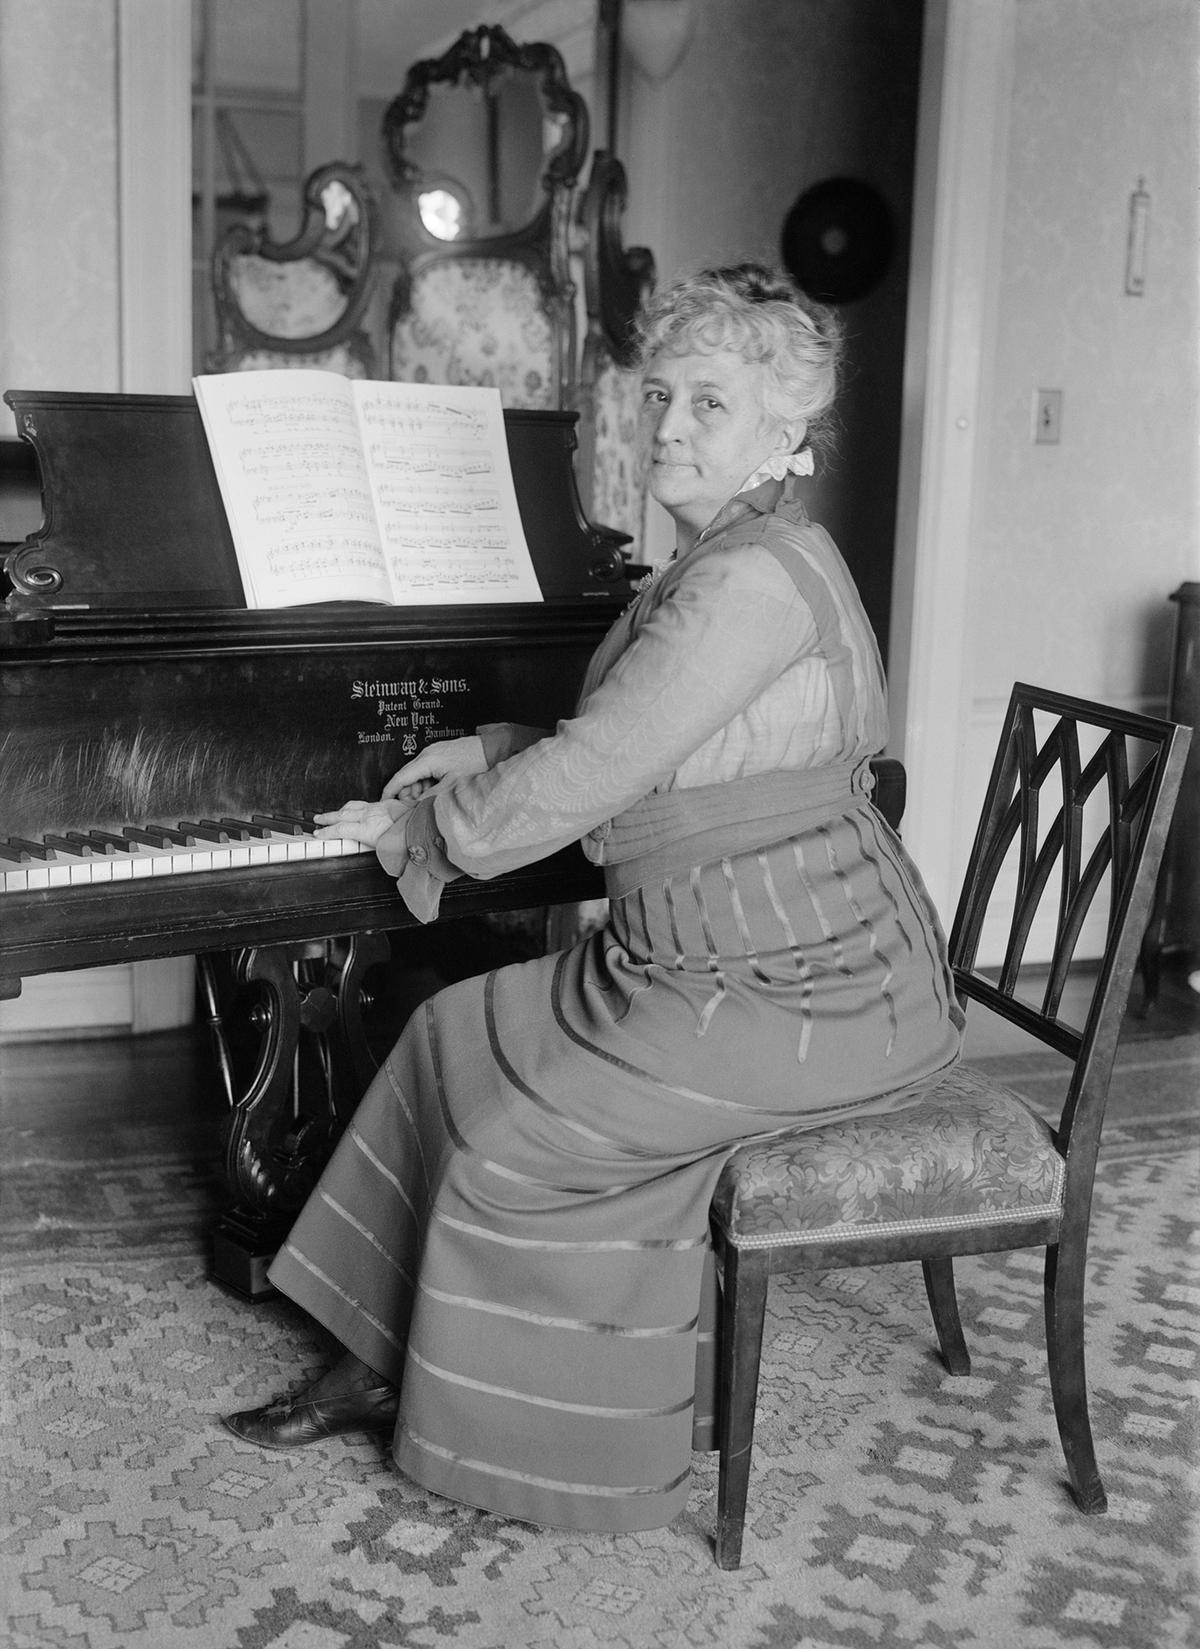 Venezuelan classical pianist, soprano, and composer Teresa Carreño seated at a Steinway & Sons piano, circa early 20th century. Library of Congress. (Public Domain)